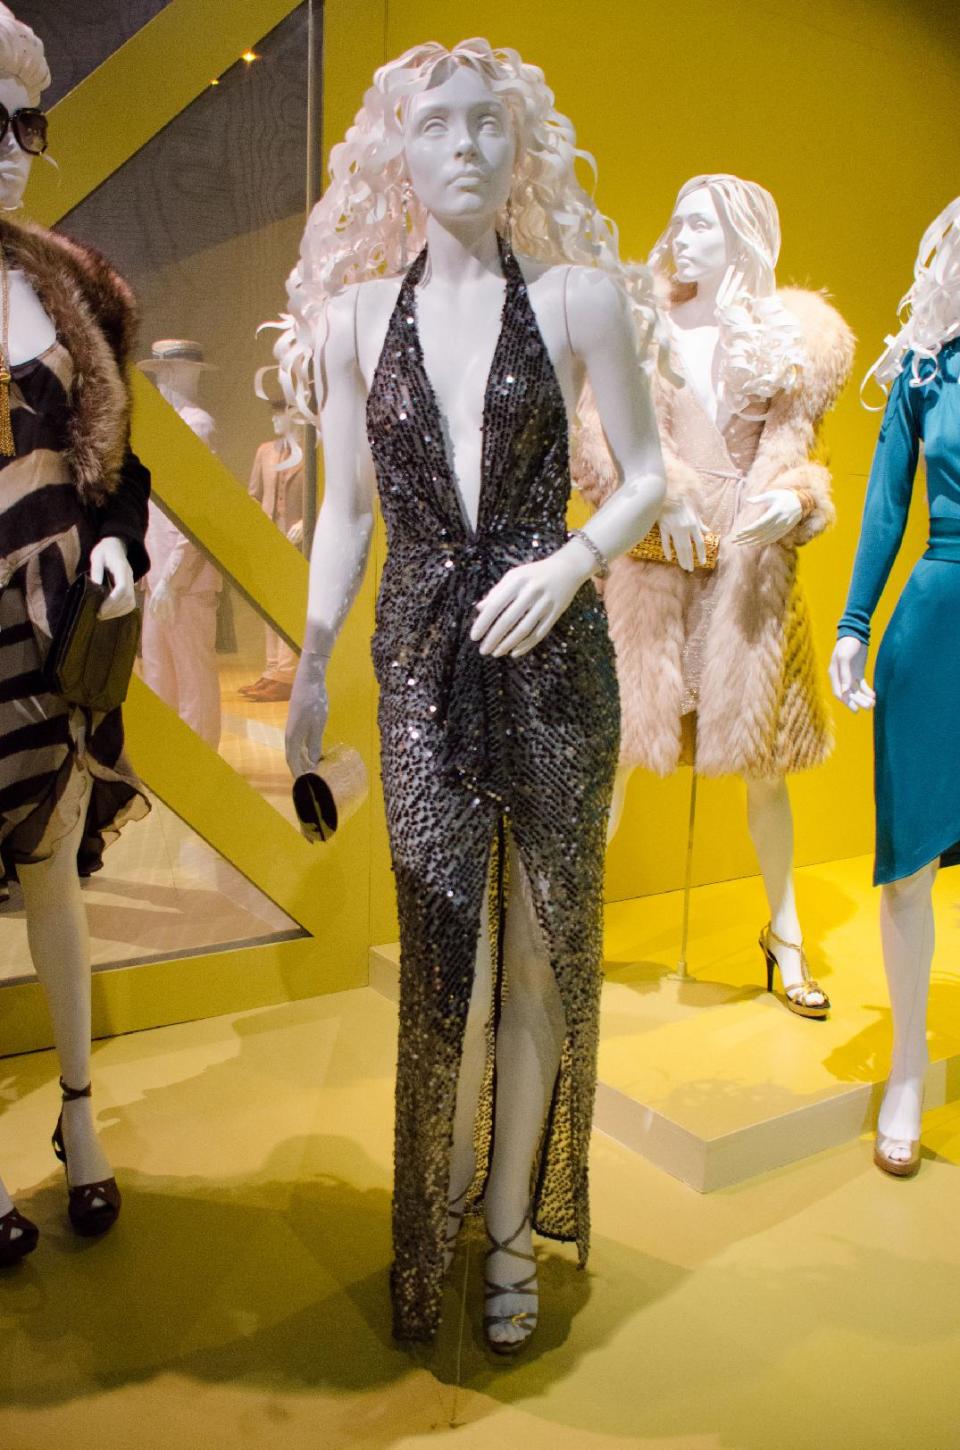 In this Saturday, Feb. 8, 2014 photo, 2014 Oscar nominated costumes for "American Hustle," by costume designer Michael Wilkinson are on display at the 22nd annual Art of Motion Picture Costume Design Exhibit, in Los Angeles, Calif. The Fashion Institute of Design & Merchandising holds its free-to-the-public Art of Motion Picture Costume Design exhibit on view until April 26, 2014, featuring this year's five Oscar nominees: "American Hustle," "The Grandmaster," "The Great Gatsby," "The Invisible Woman" and "12 Years A Slave," in Los Angeles. (Photo by Tonya Wise/Invision/AP)